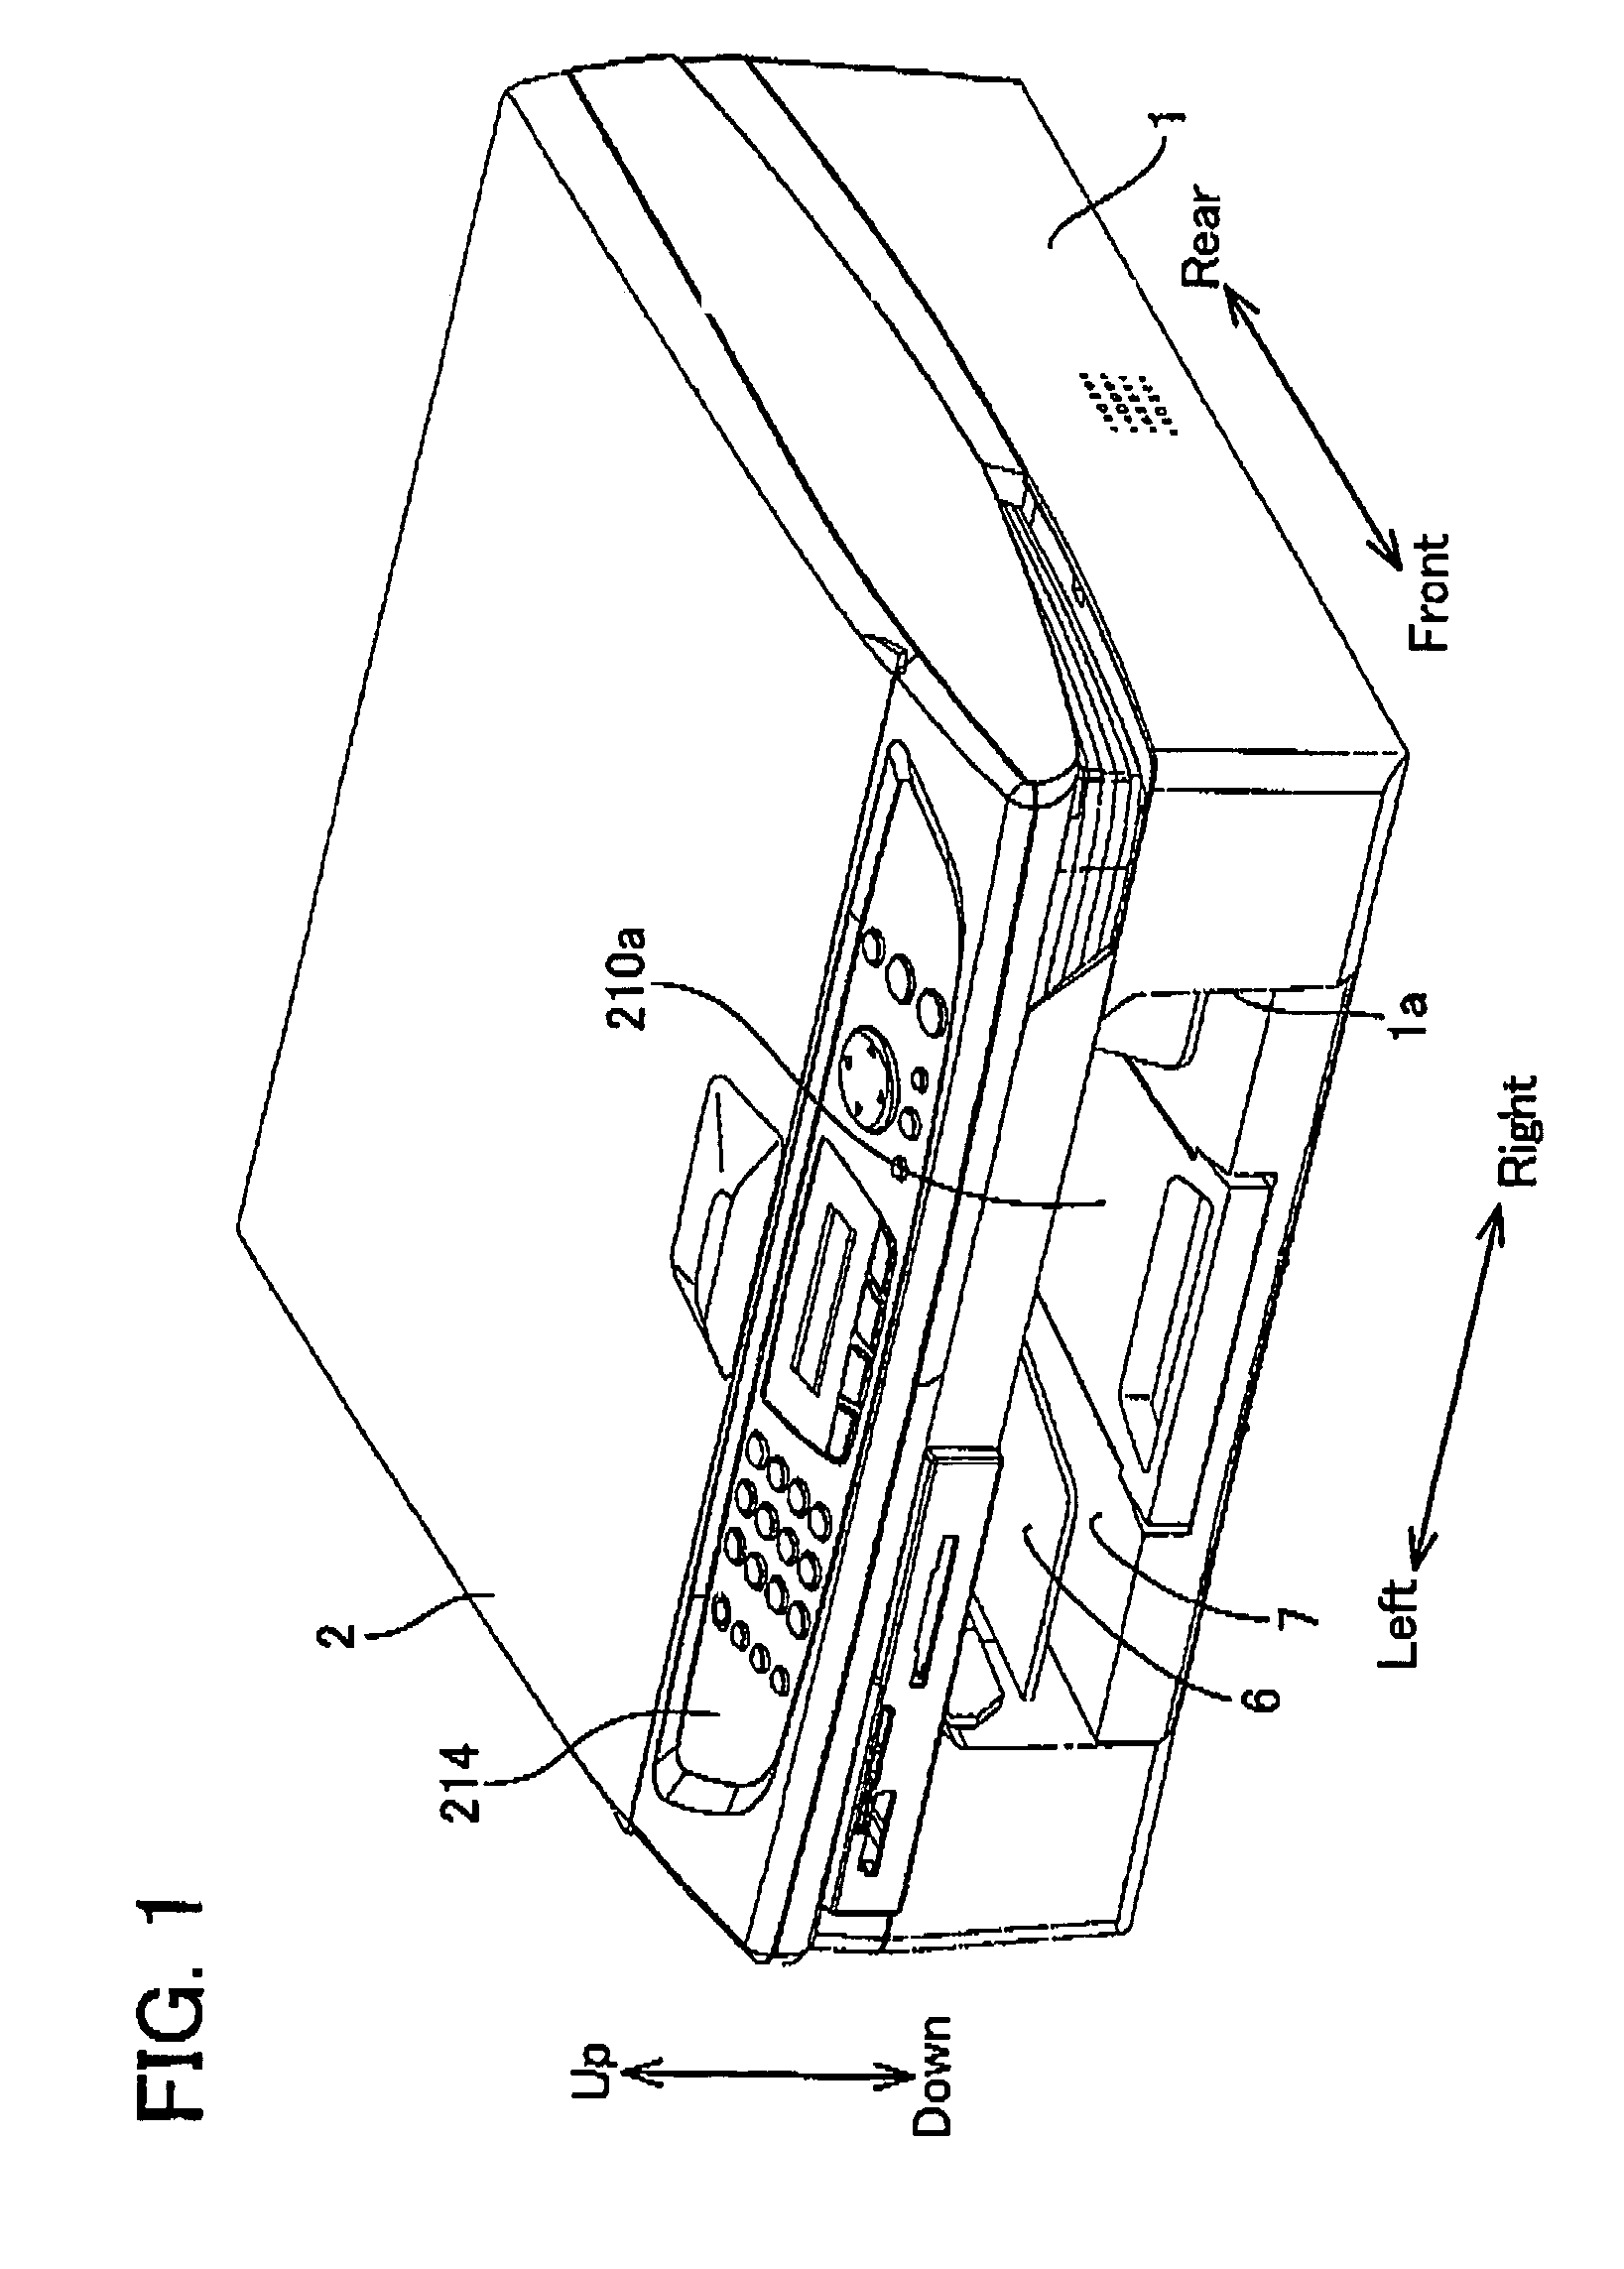 Method and apparatus for controlling the sheet feeding speed in a printer